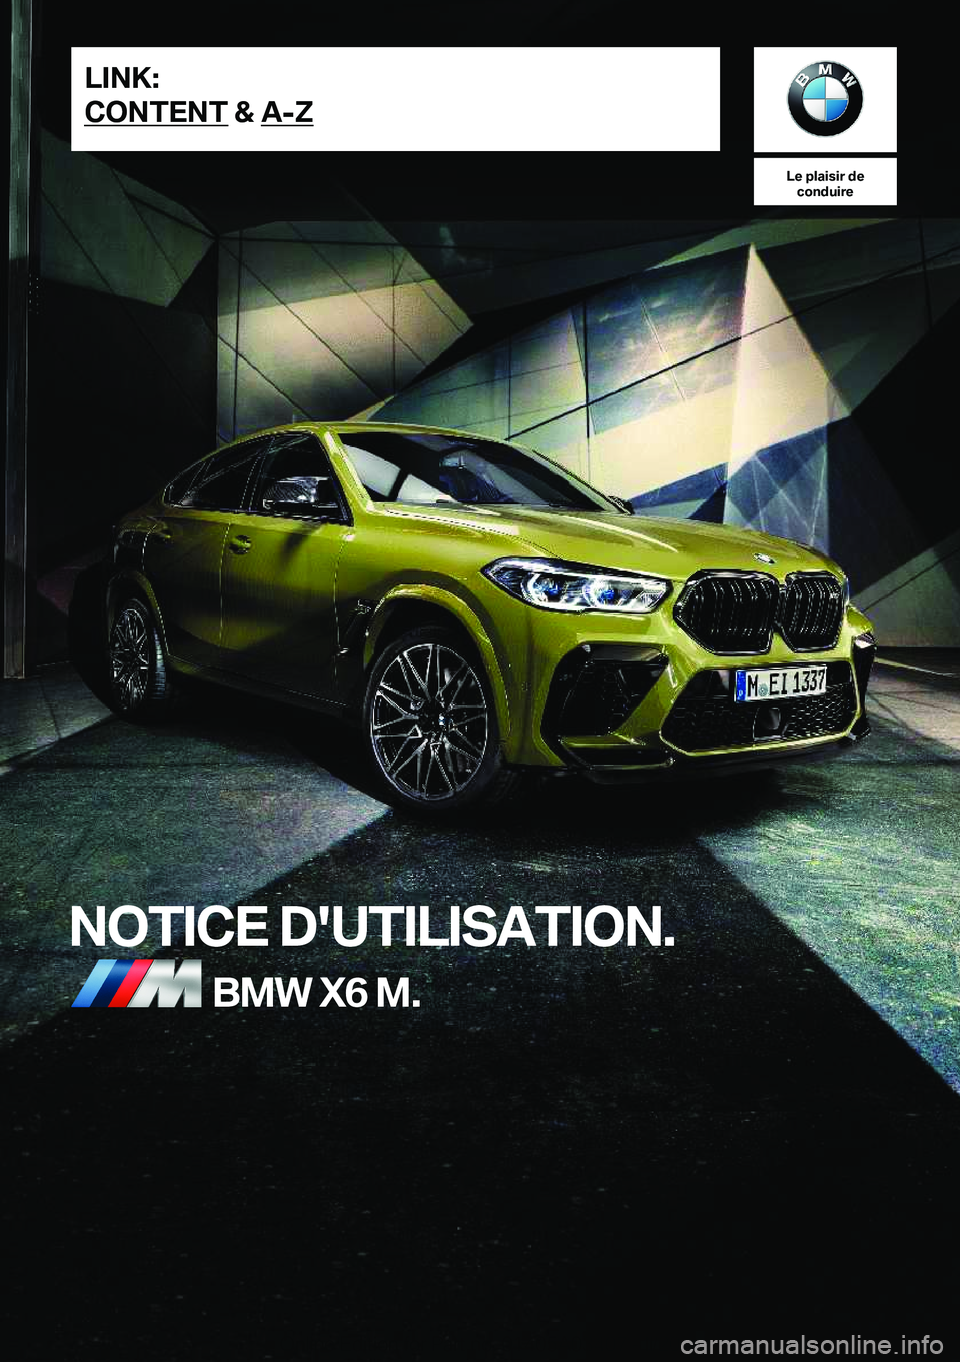 BMW X6 M 2020  Notices Demploi (in French) �L�e��p�l�a�i�s�i�r��d�e�c�o�n�d�u�i�r�e
�N�O�T�I�C�E��D�'�U�T�I�L�I�S�A�T�I�O�N�.�B�M�W��X�6��M�.�L�I�N�K�:
�C�O�N�T�E�N�T��&��A�-�Z�O�n�l�i�n�e��E�d�i�t�i�o�n��f�o�r��P�a�r�t��n�o�.�